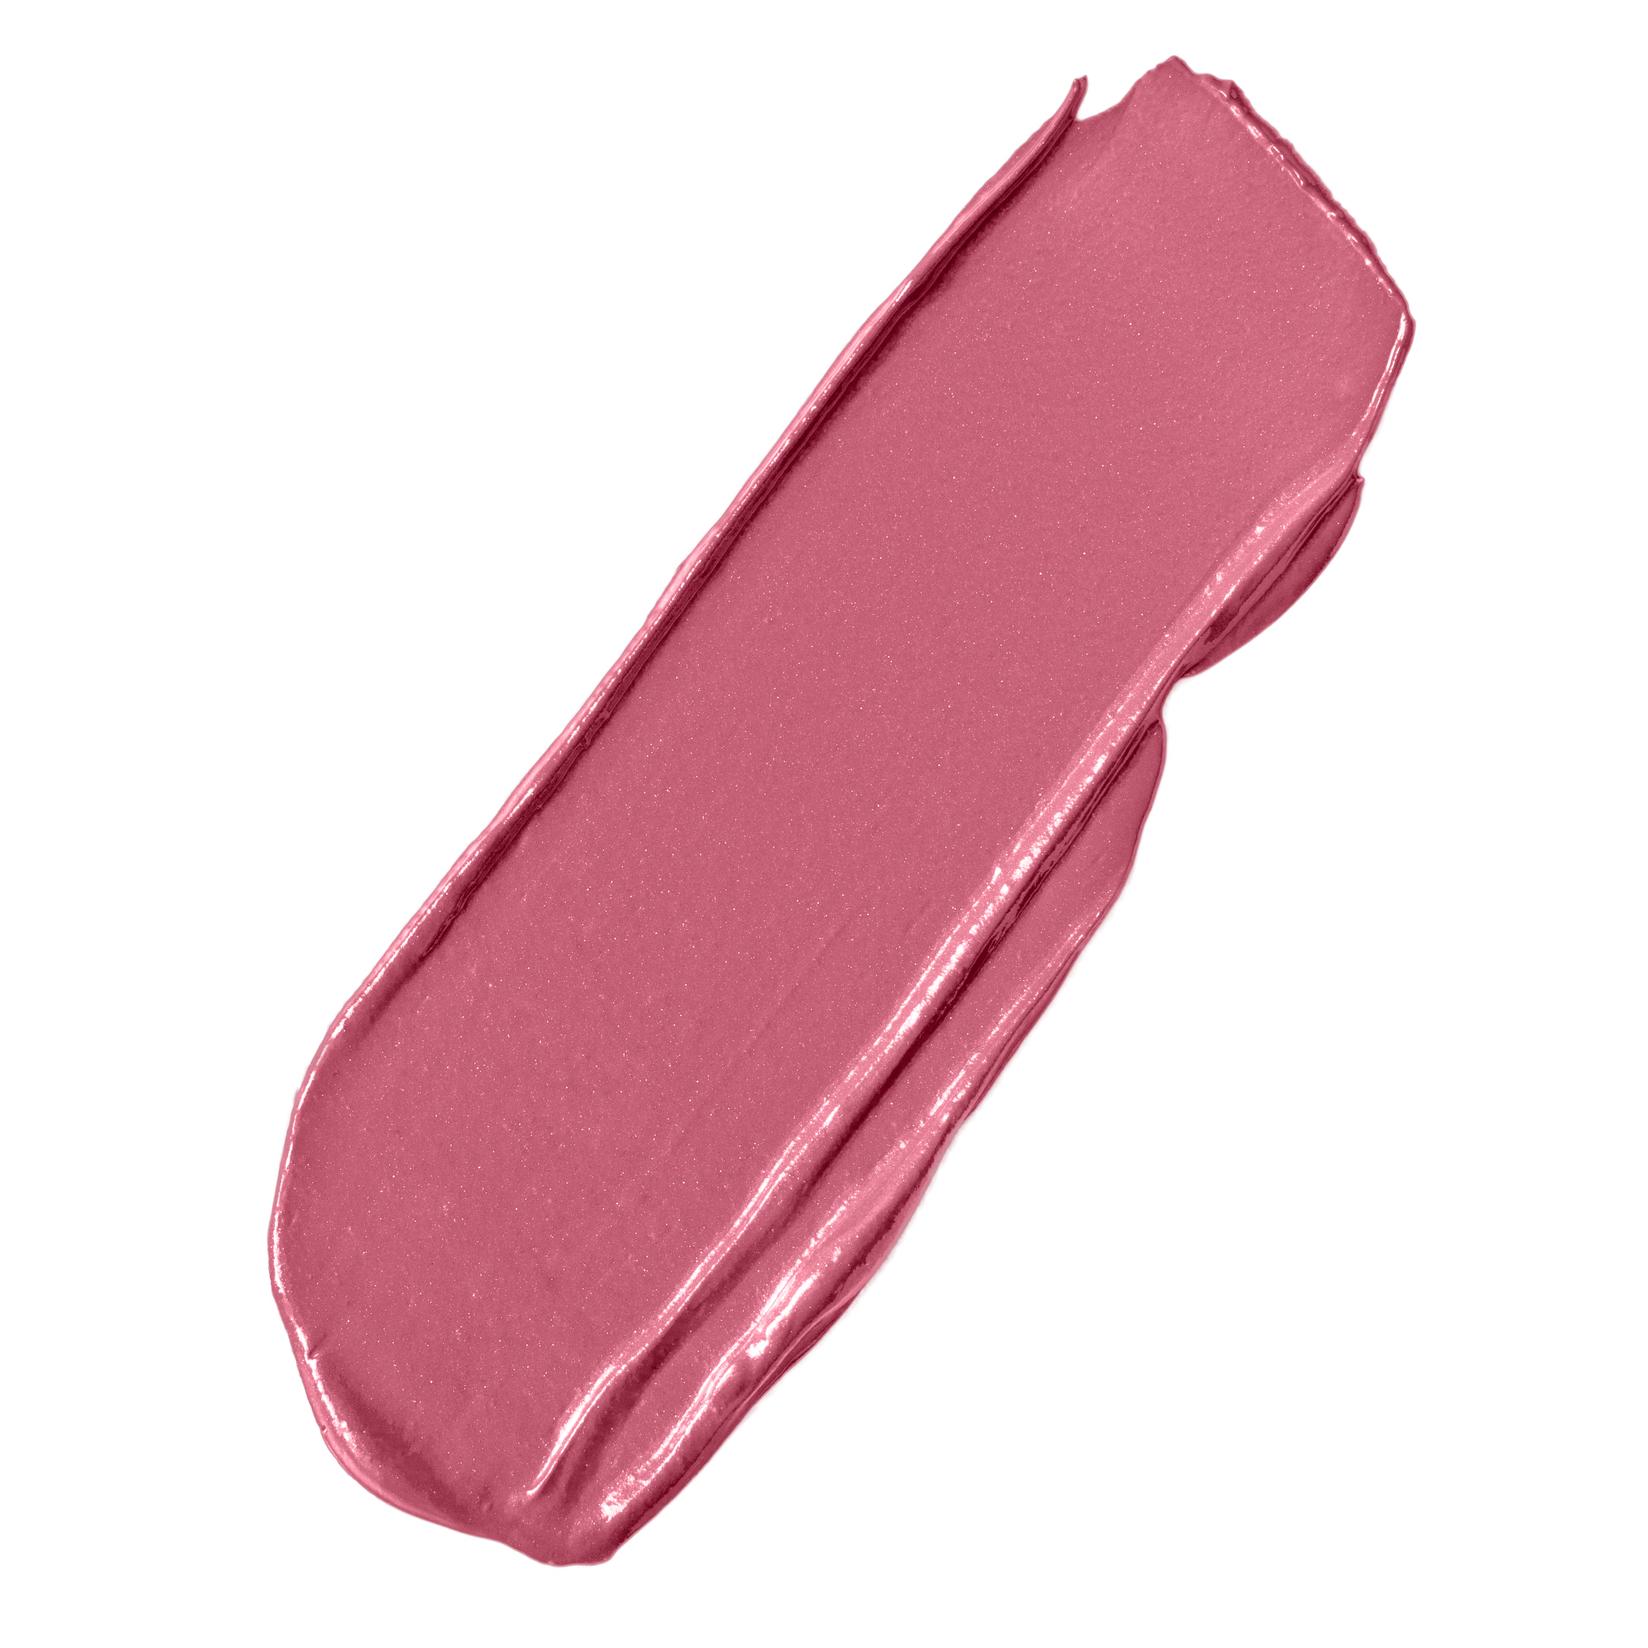 Selected image for wet n wild Cloud Pout marshmallow lip mousse Sjaj za usne, 1111925E Girl, you're whipped, 3 ml